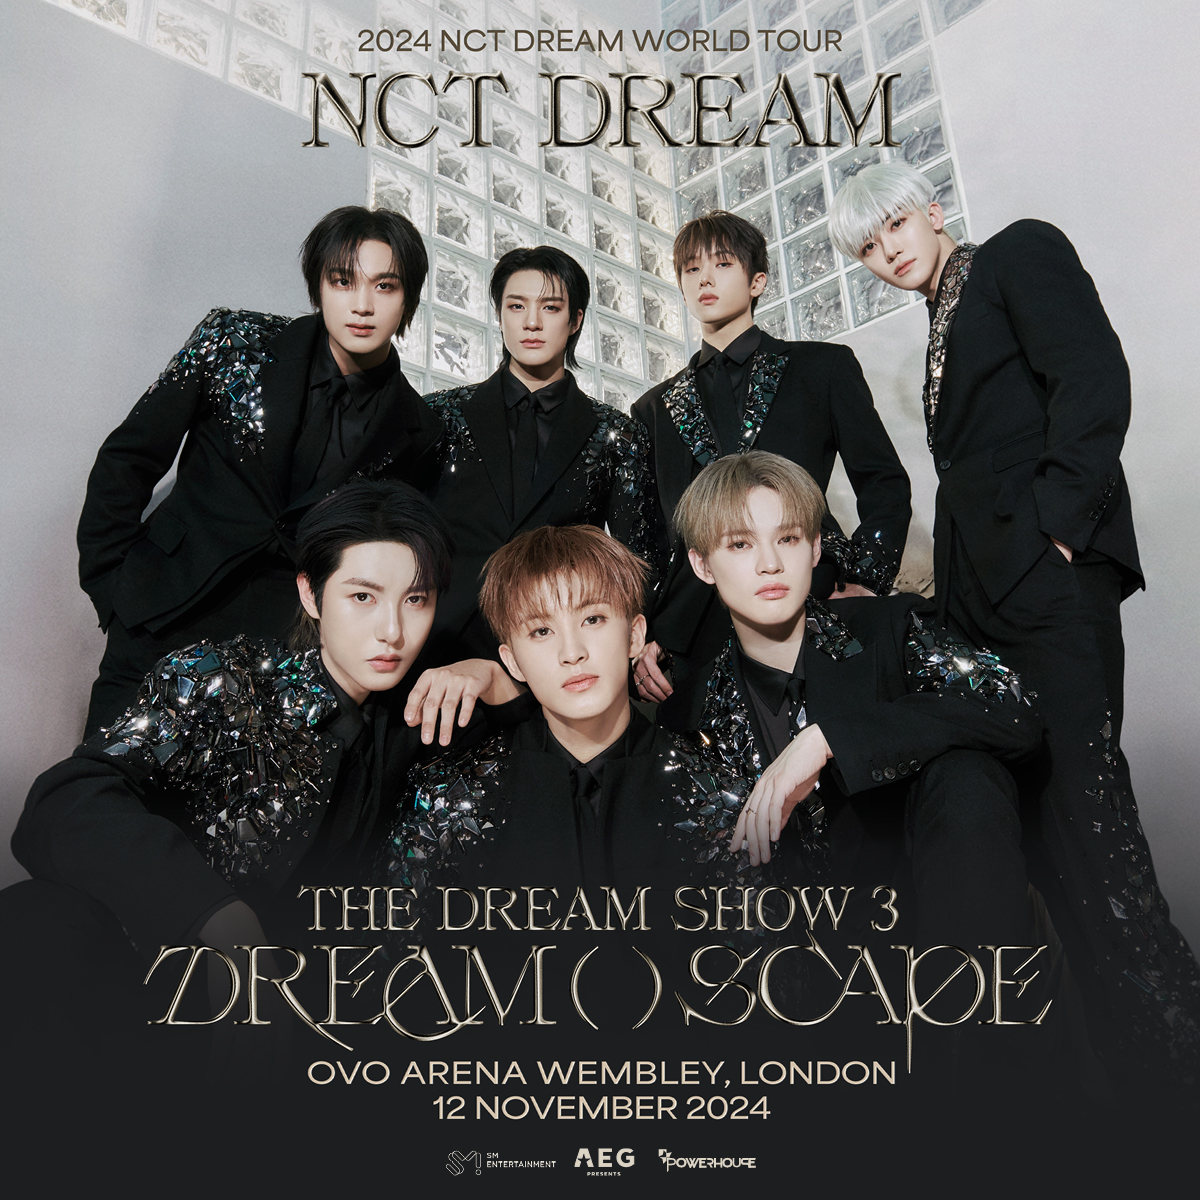 #AXSONSALE 🌟🎉@NCTsmtown_DREAM brings the 2024 NCT DREAM WORLD TOUR to the @OVOArena Wembley on 12th November 2024. 🌌 The Dream Show 3 celebrates #NCTDREAM’s latest album DREAM( )SCAPE, showcasing their musical world ✨ ⏰ Tickets are on sale at 10am 🎫 w.axs.com/sLlF50Rzeh0